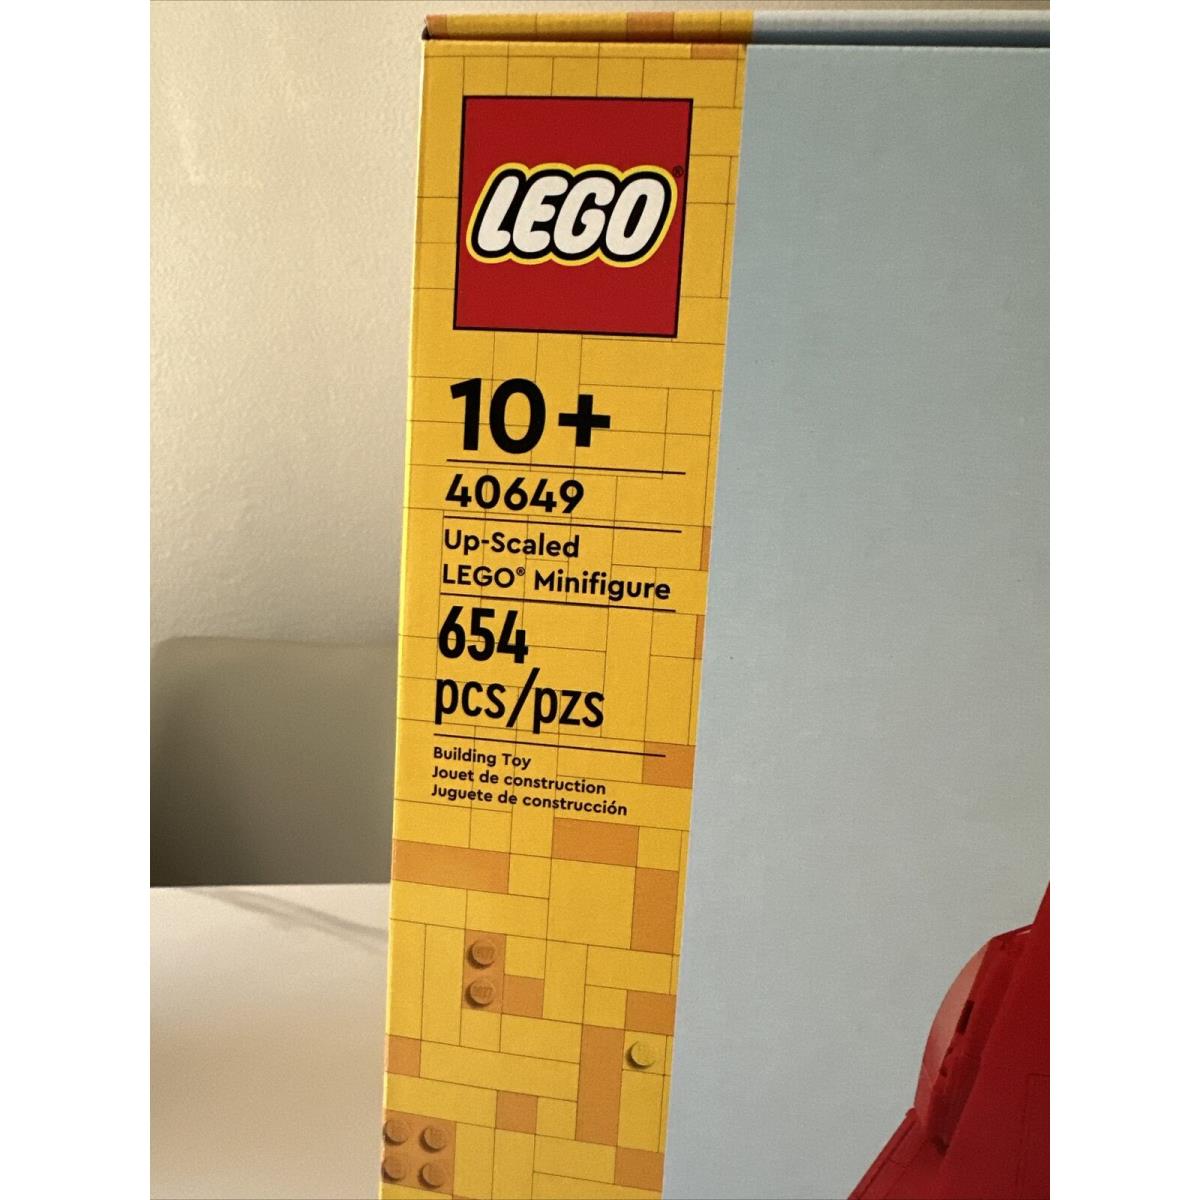 1 x Lego 40649 Up-scaled Minifigure in Box 654 Pieces